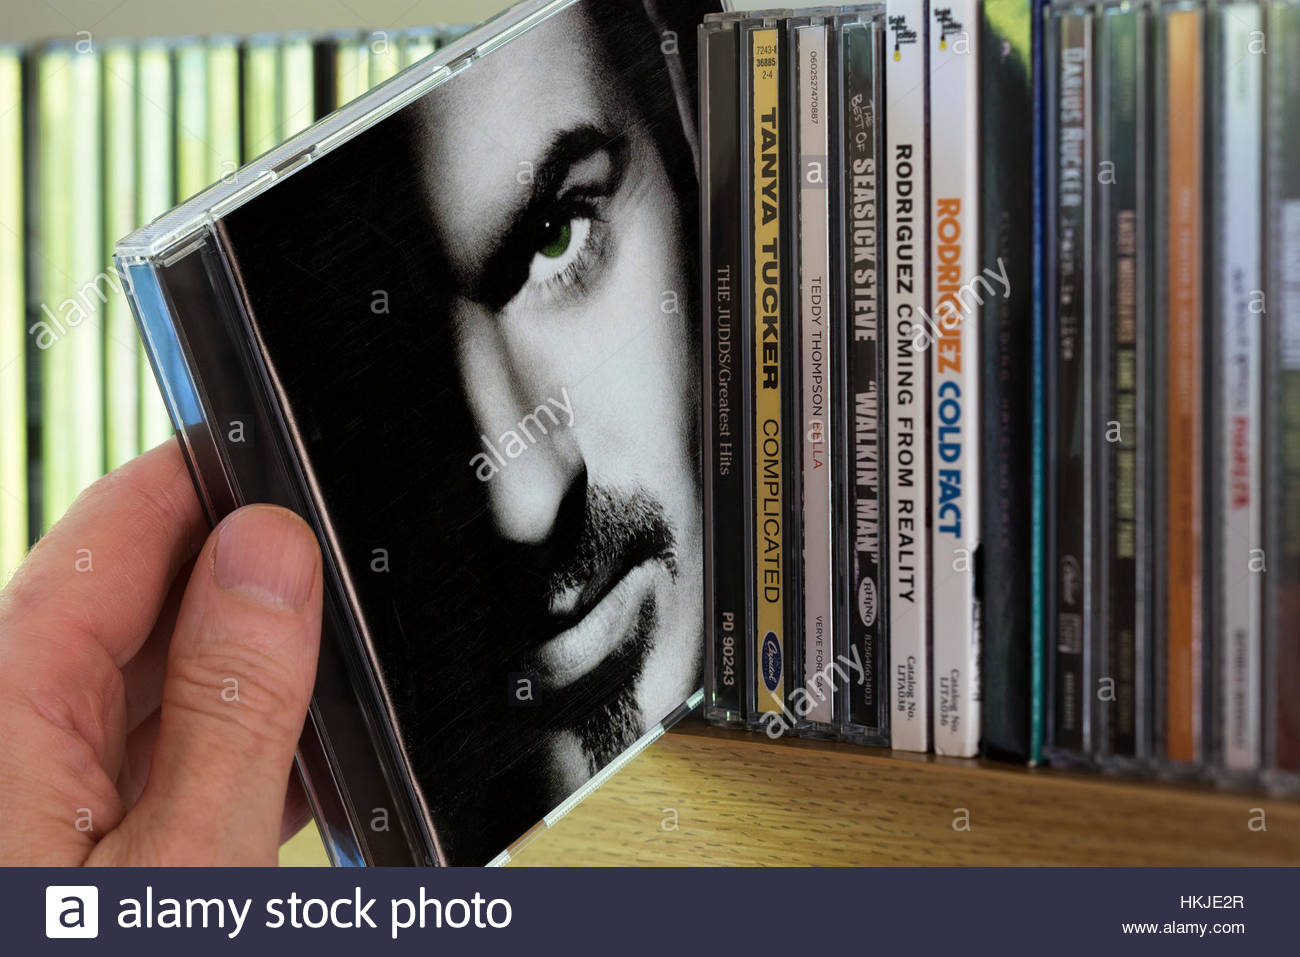 George Michael 1980s Stock Photos & George Michael 1980s Stock Images ...